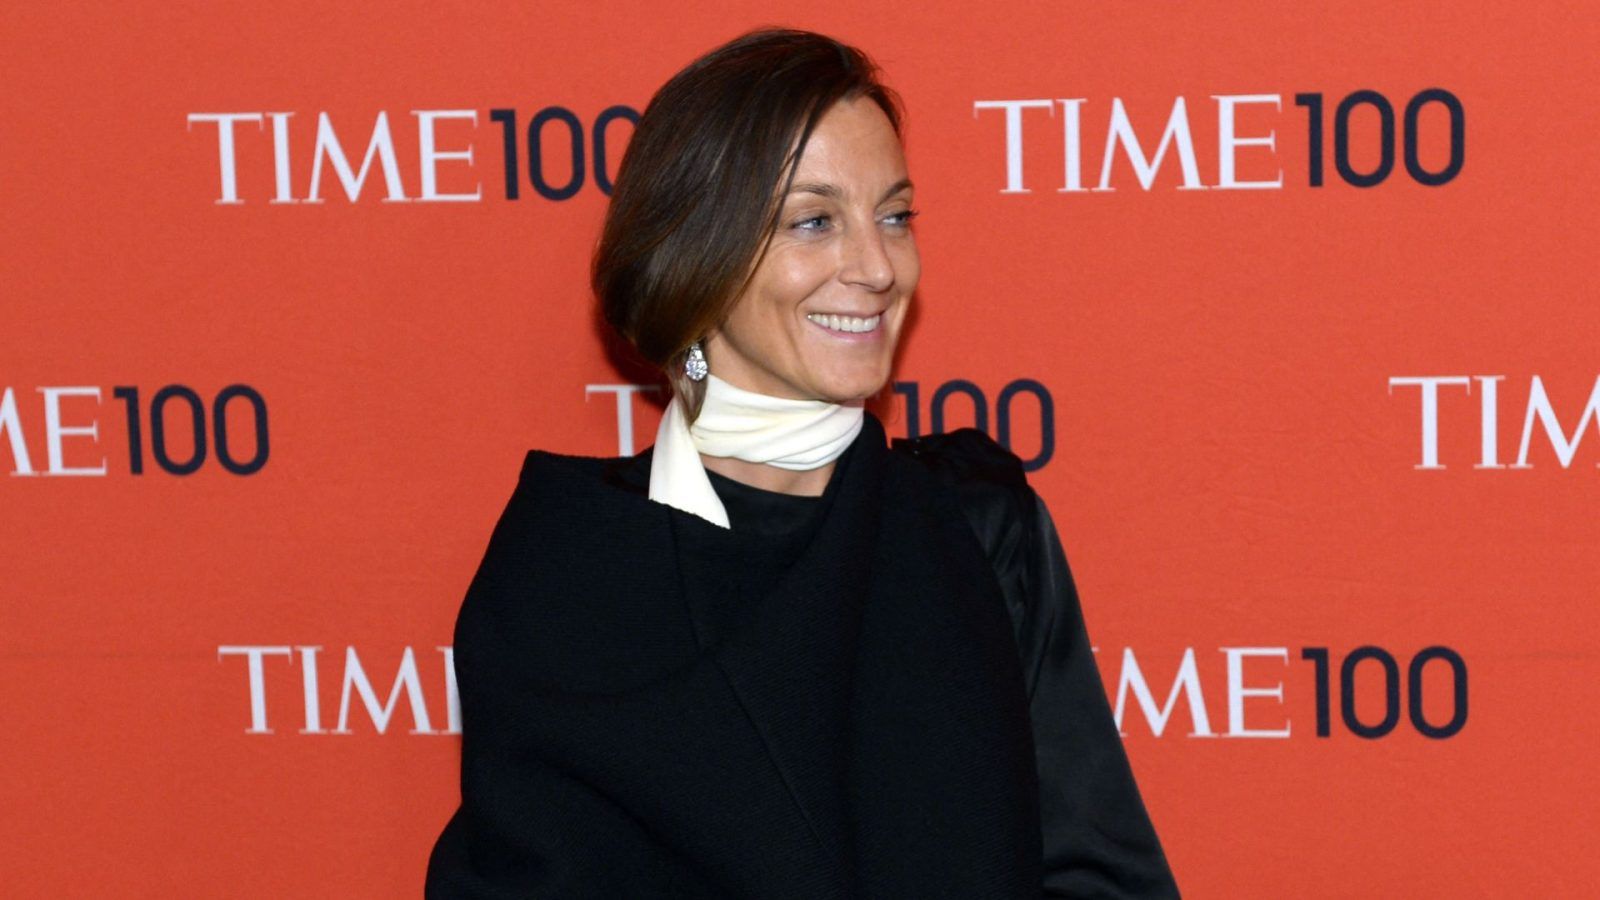 IS PHOEBE PHILO COMING BACK IN 2023? 